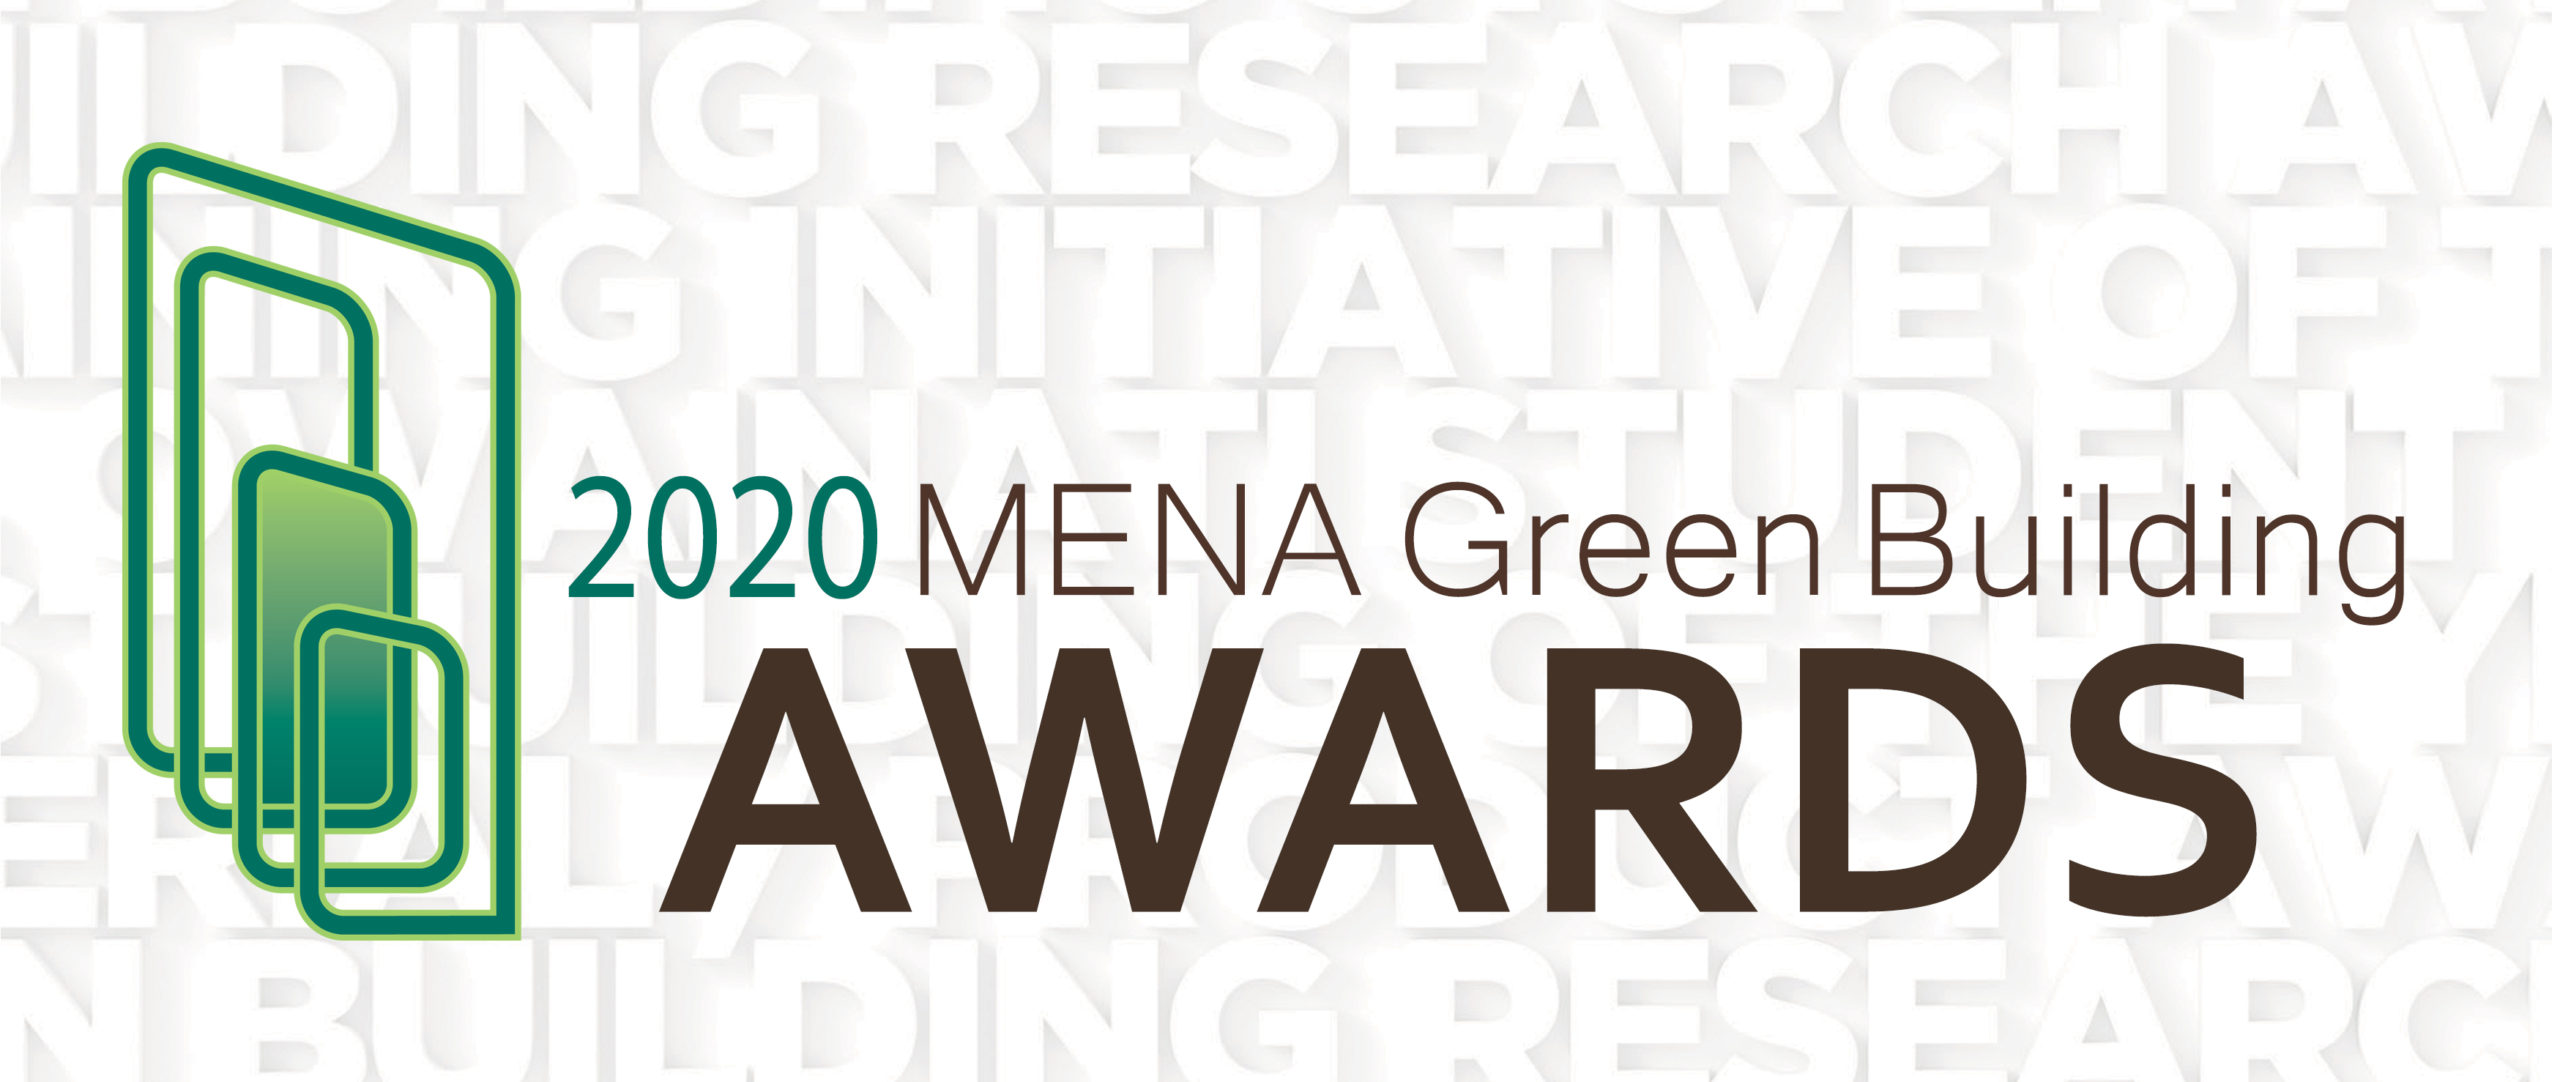 Image for 9th Annual EmiratesGBC Congress And MENA Green Building Awards To Be Held On Nov. 17 & 18 In Dubai;  Extends Deadline For Award Entries